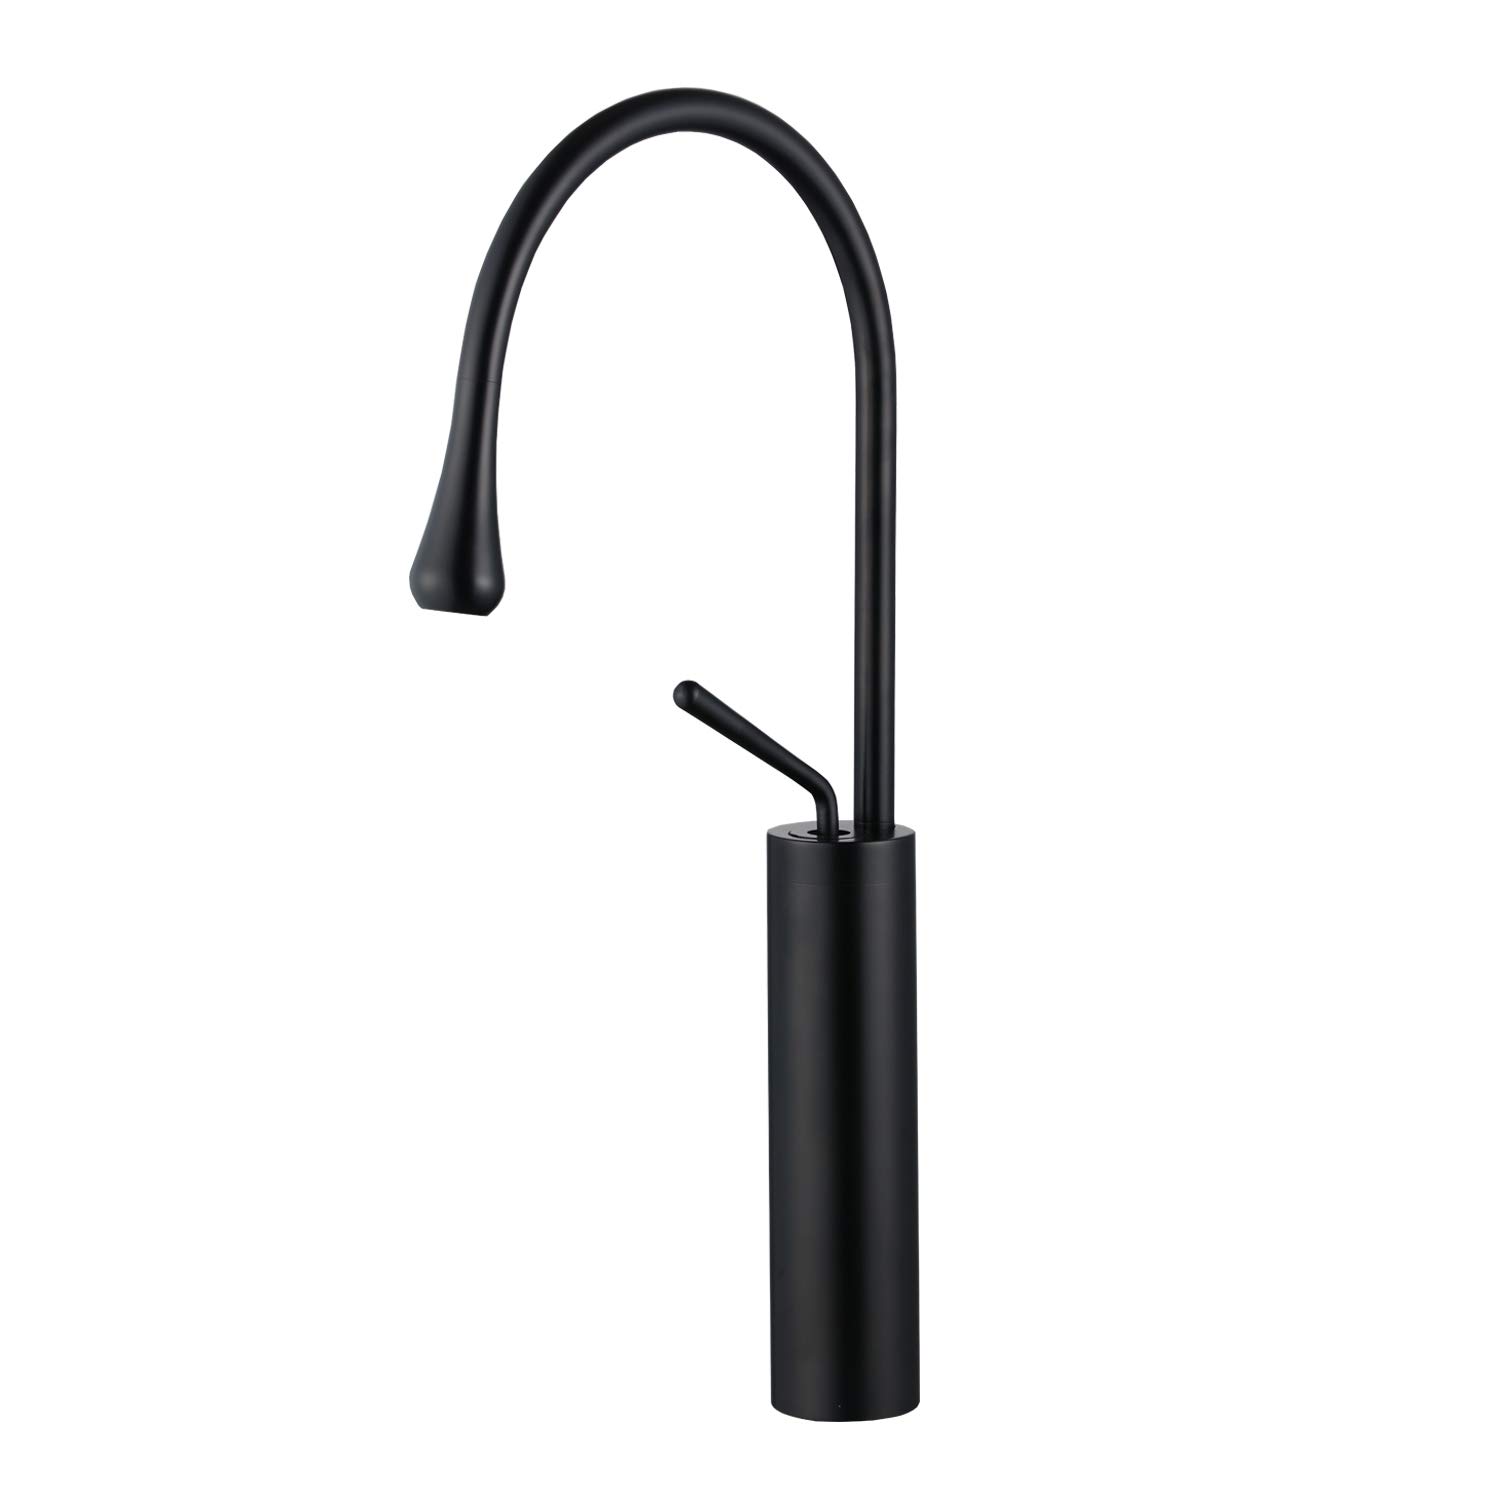 Aquieen Single Lever Basin Sink Mixer connecting hoses and installation kit (Drop Black)